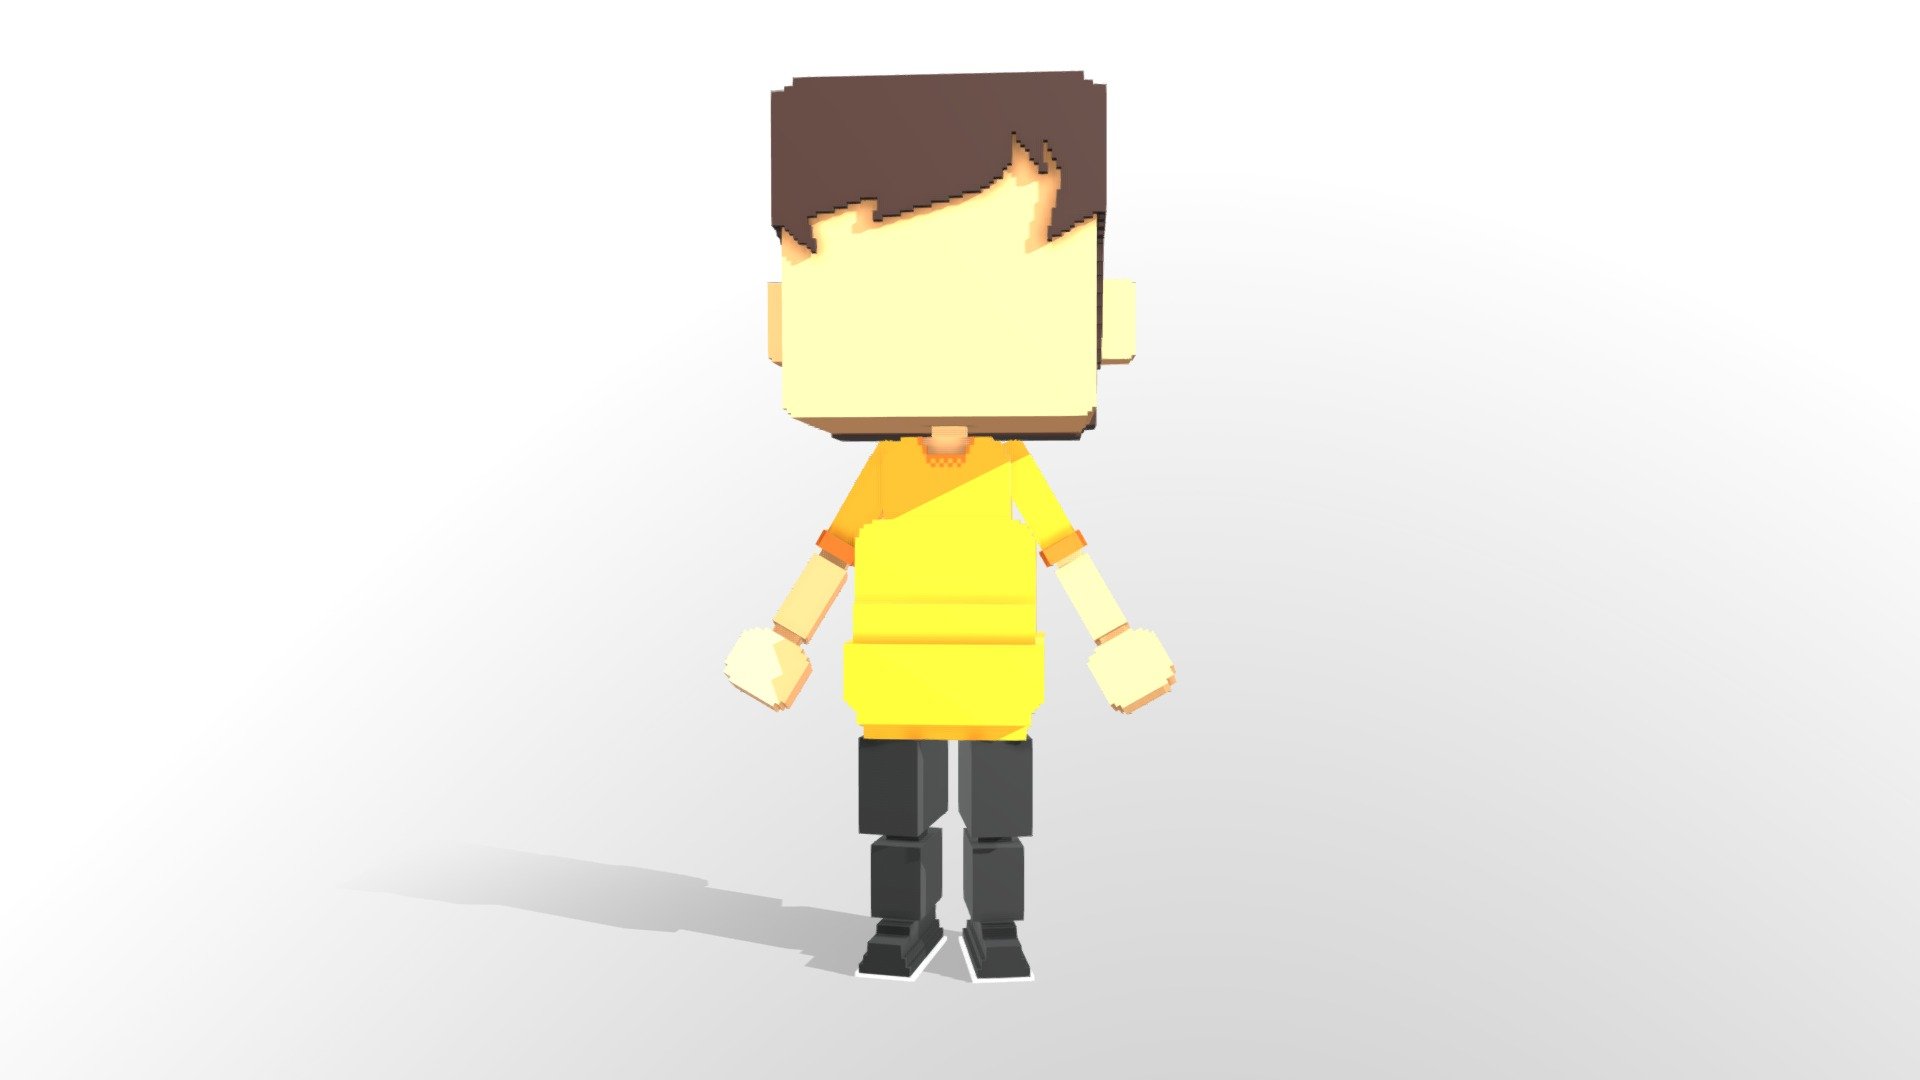 Nendoroid Rig / Model

[Commission Open] Custom Character $10 to $15 If you need/want a RigModel in this nendoroid style hit me up at here

Replace the Plane with a Face Material/Texture

Twitter : https://twitter.com/IMakeVoxels

Discord : A Guy Eating Noodles Forever#8964 - Voxel Chibi Male MC + Animations - Buy Royalty Free 3D model by IMakeVoxels (@faruqjafni) 3d model